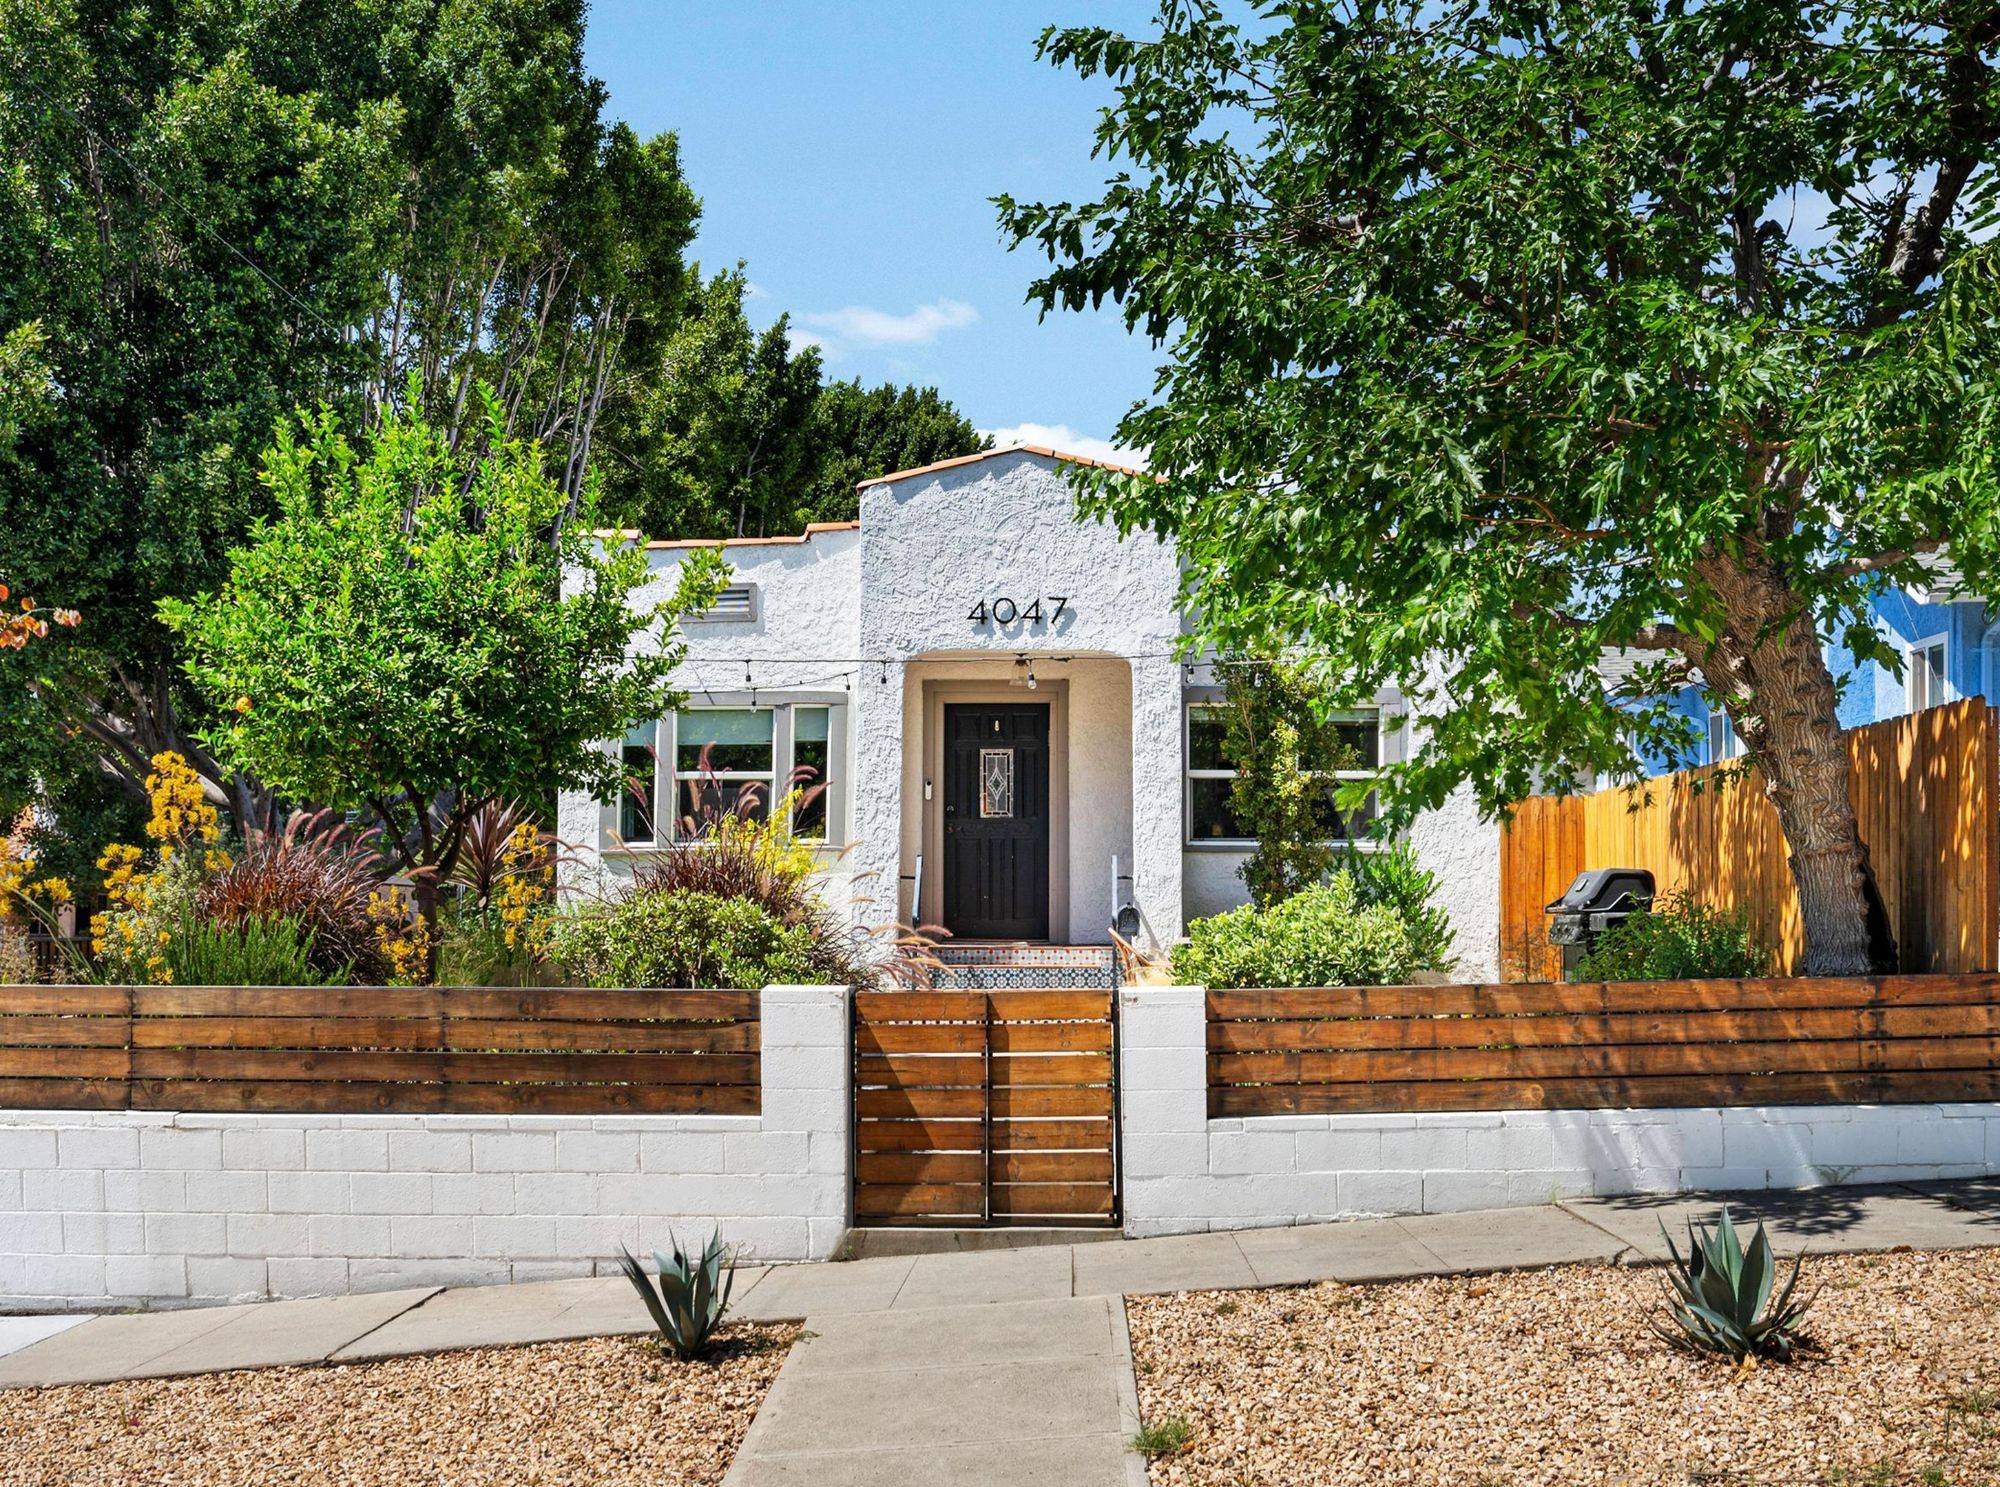 TWO DETACHED HOMES ON ONE LOT IN LOS FELIZ